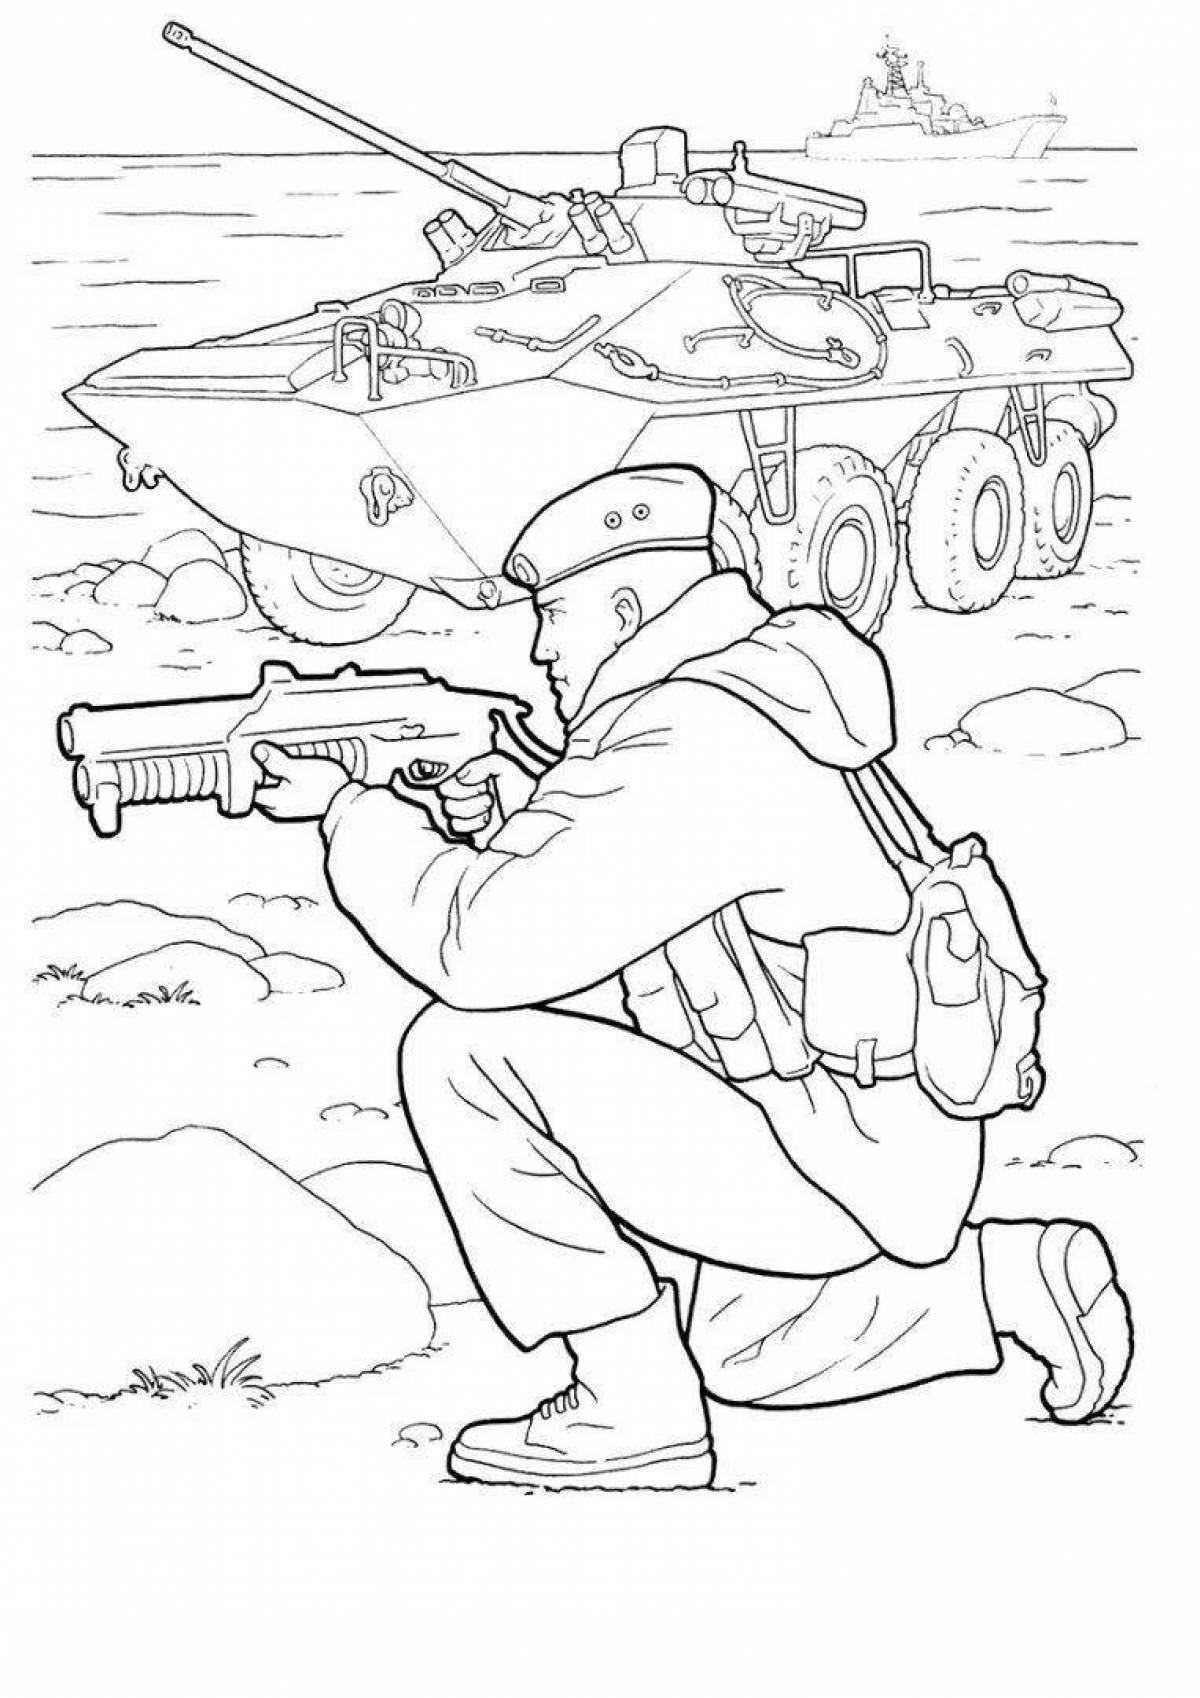 Strike on our army is strong coloring page